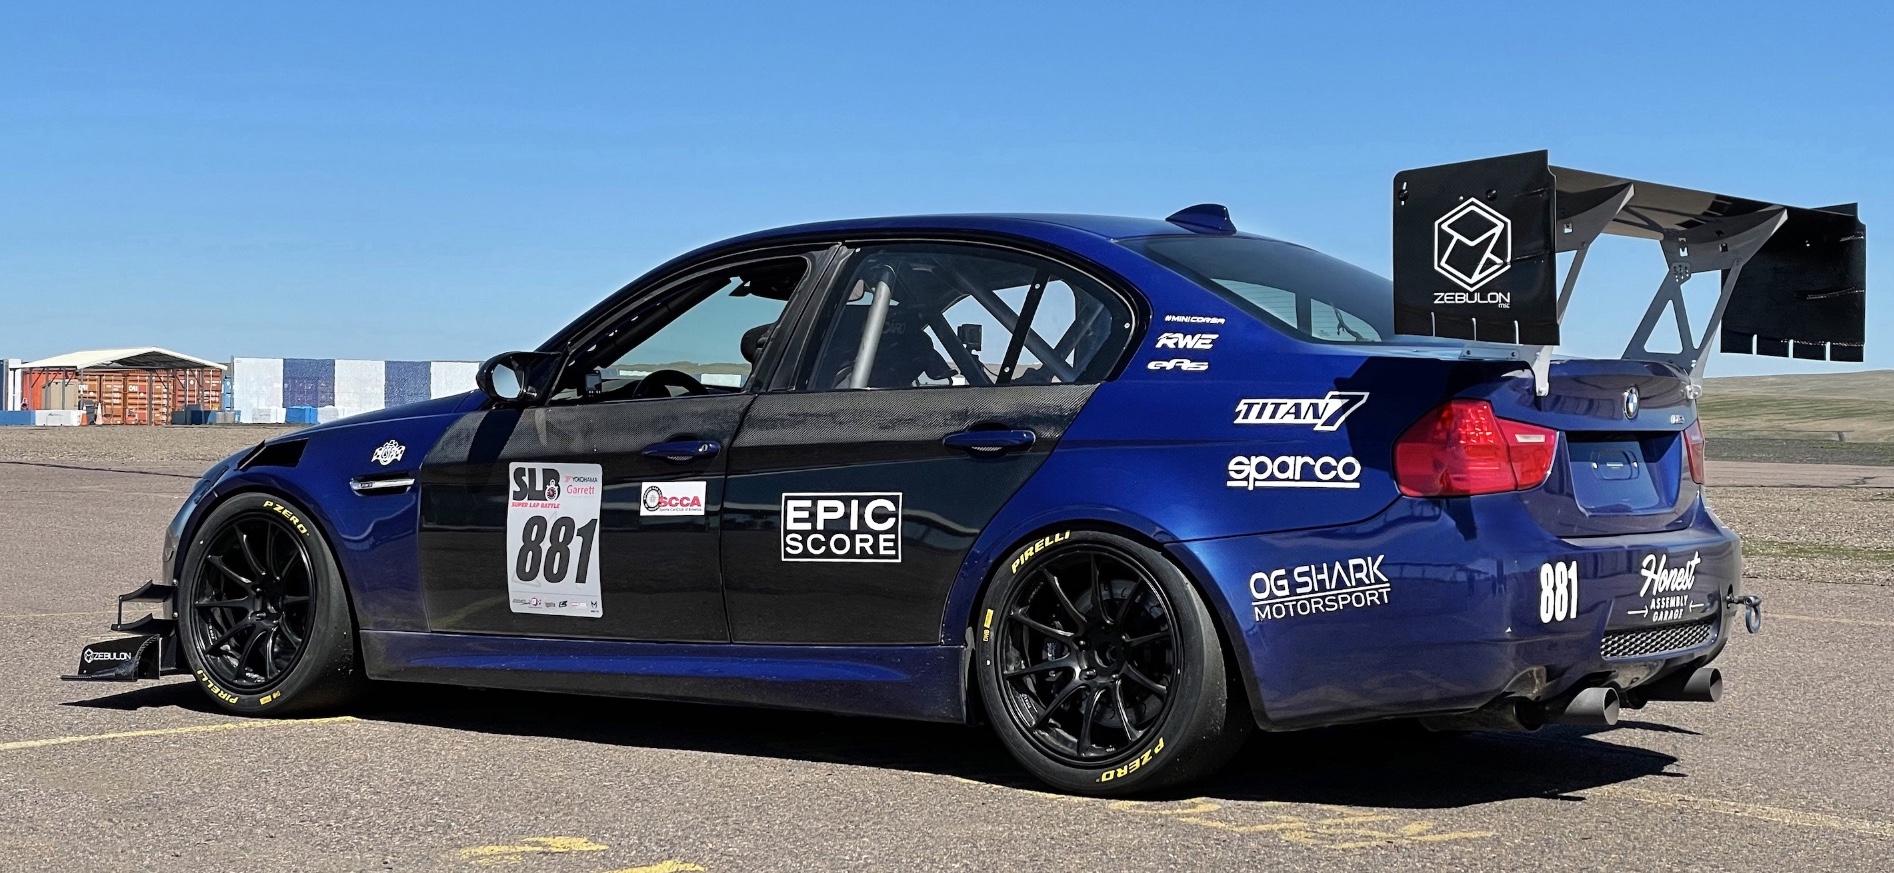 BMW Tuning Software By Epic Motorsports…  Racecar levels of performance  tuning for your BMW